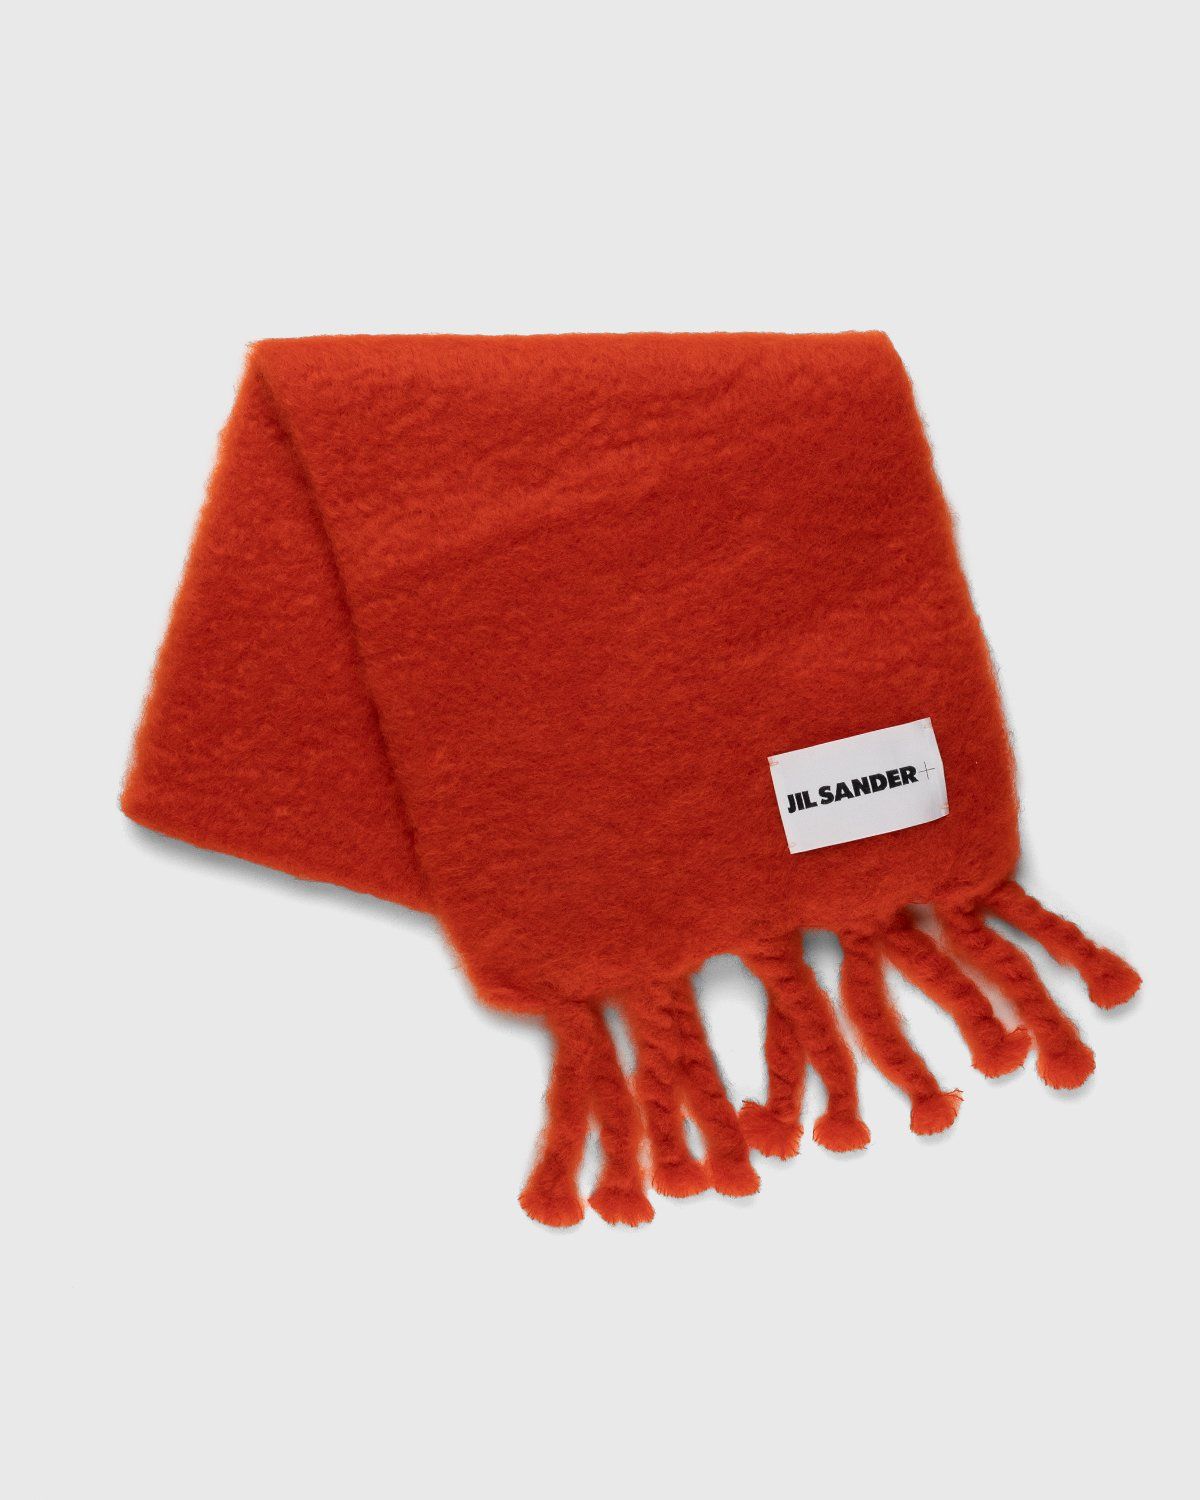 Jil Sander – Woven Scarf Red - Knits - Red - Image 1